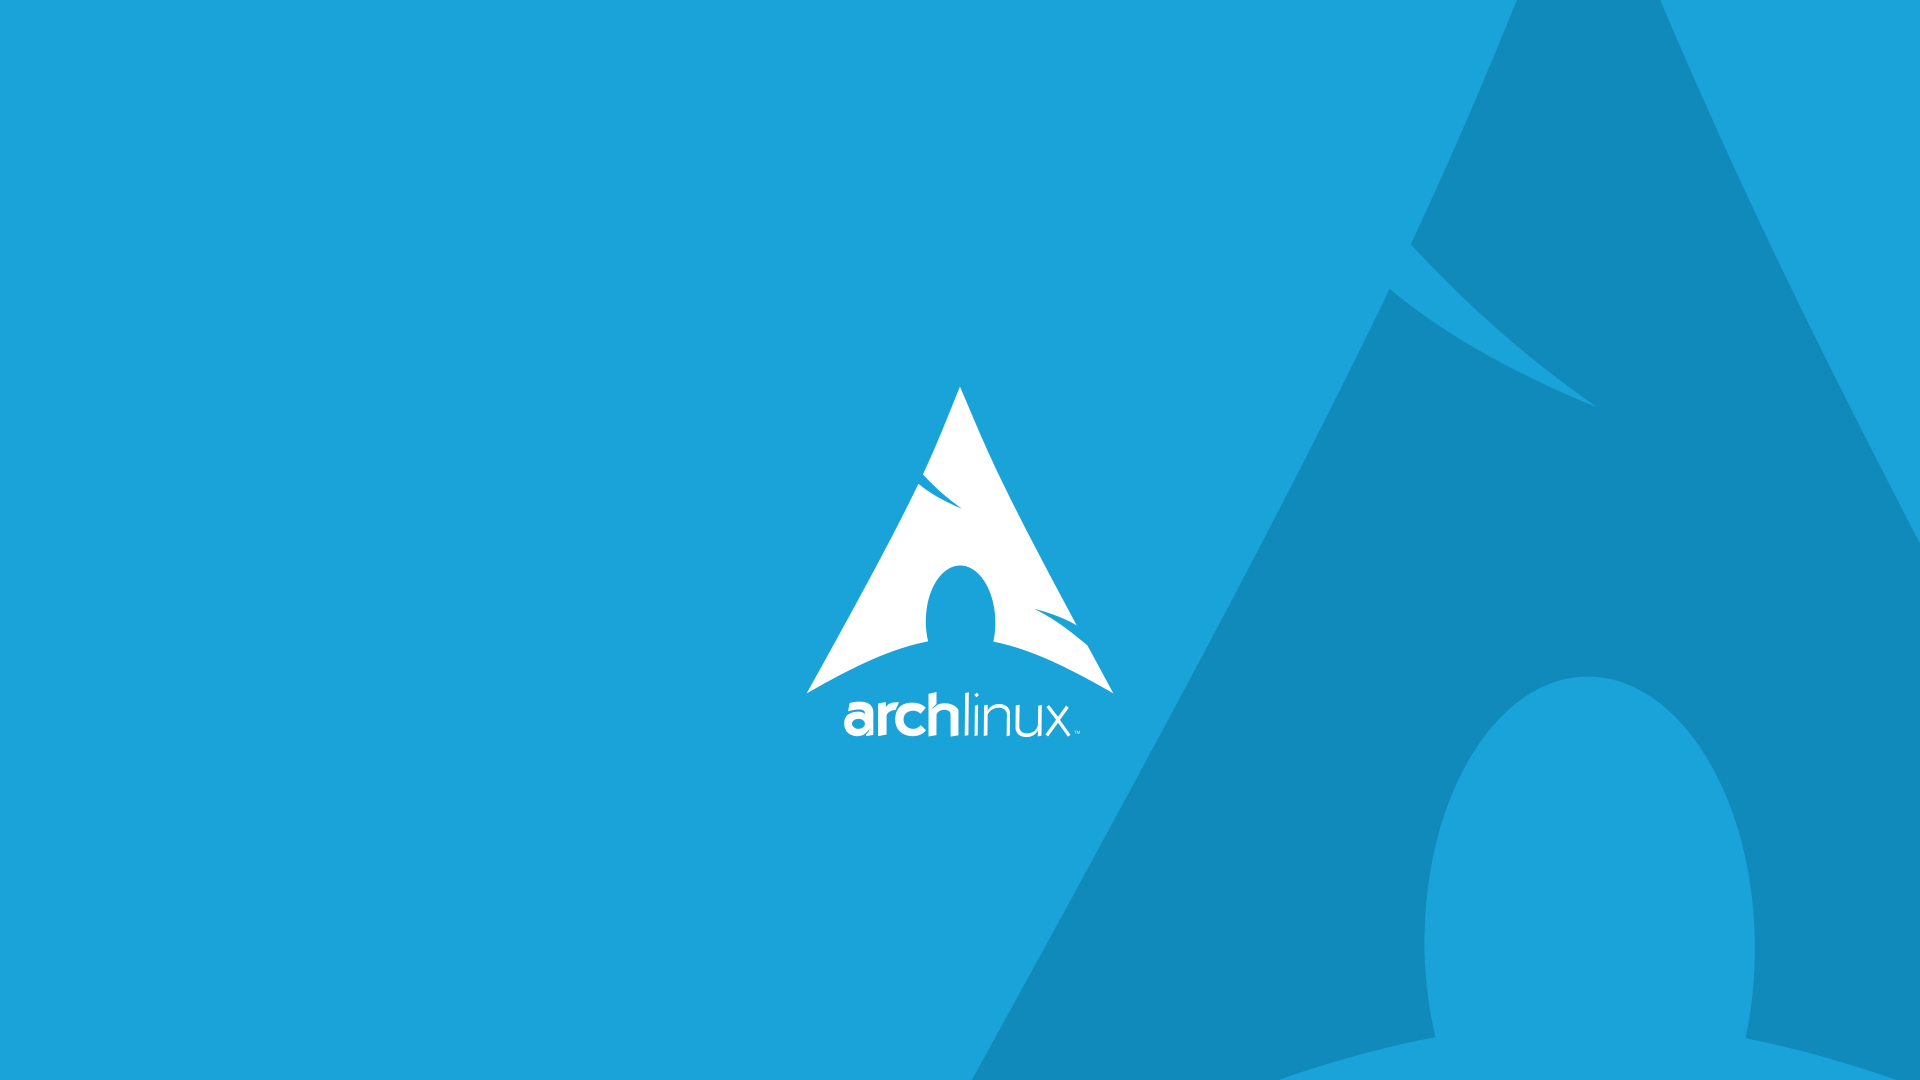 Arch Linux Wallpaper 1920x1080 (Picture)